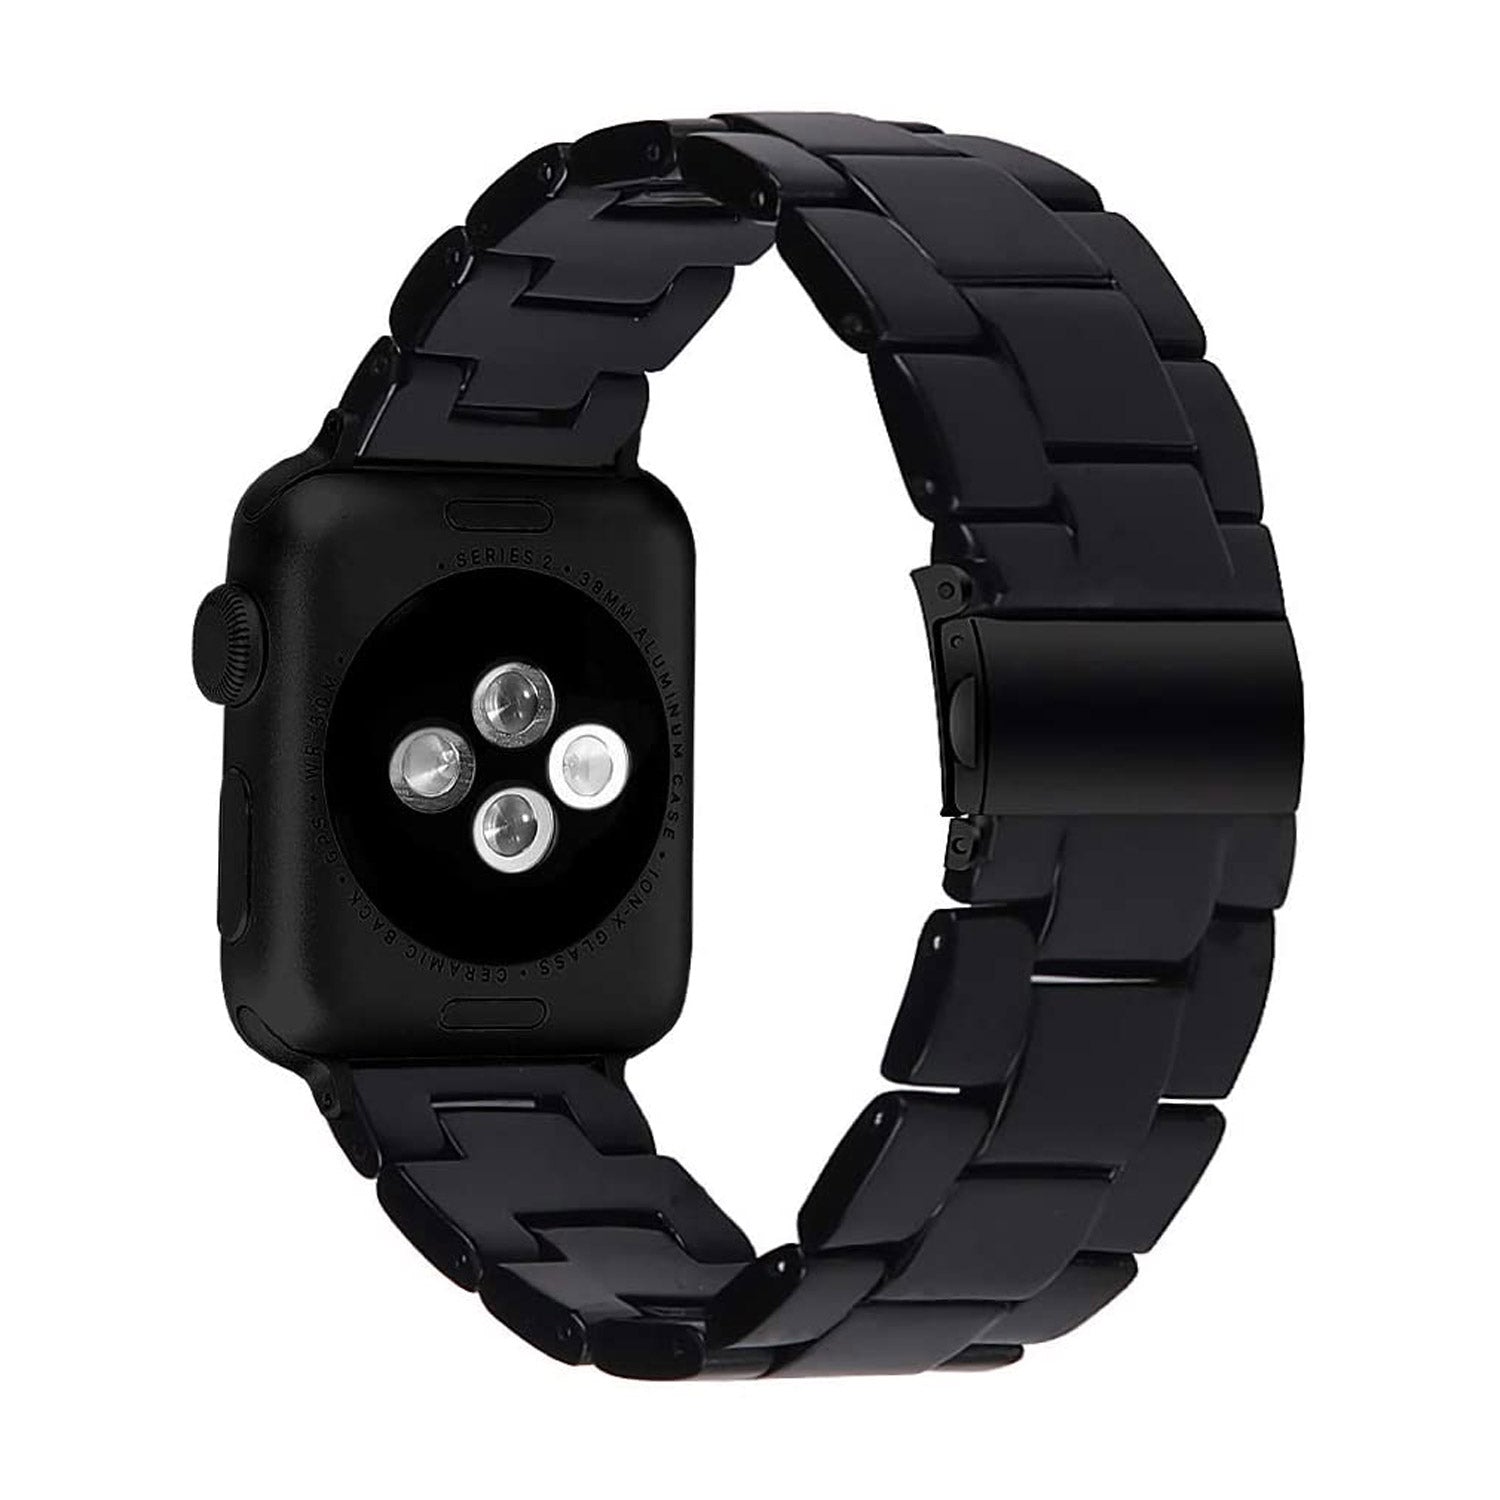 Tough On Apple Watch Band Series 1 / 2 / 3 42mm Resin Black